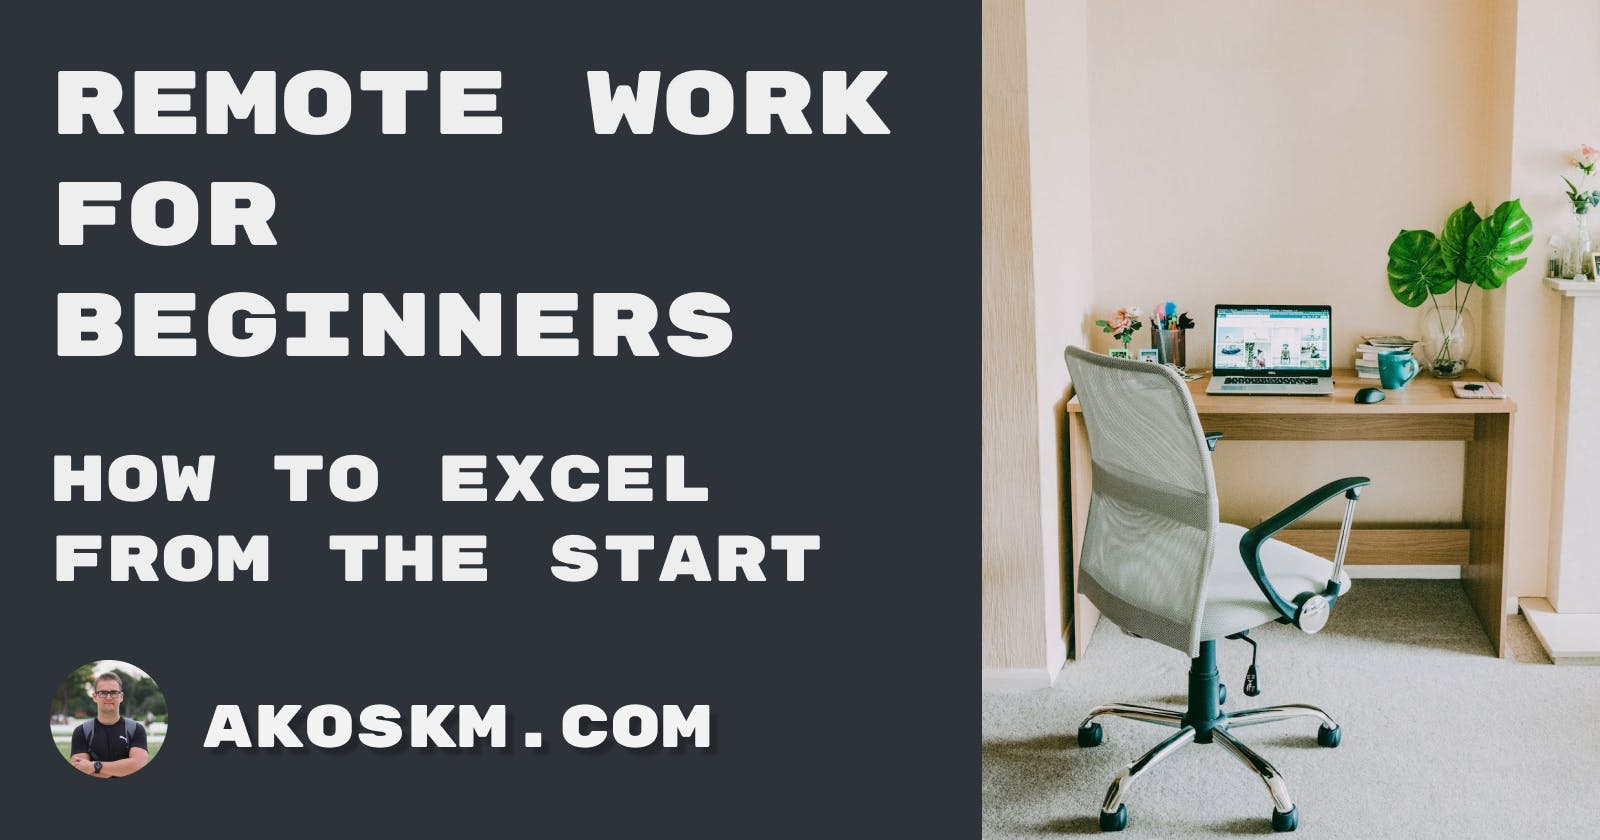 Remote Work for Beginners: How to Excel from the Start